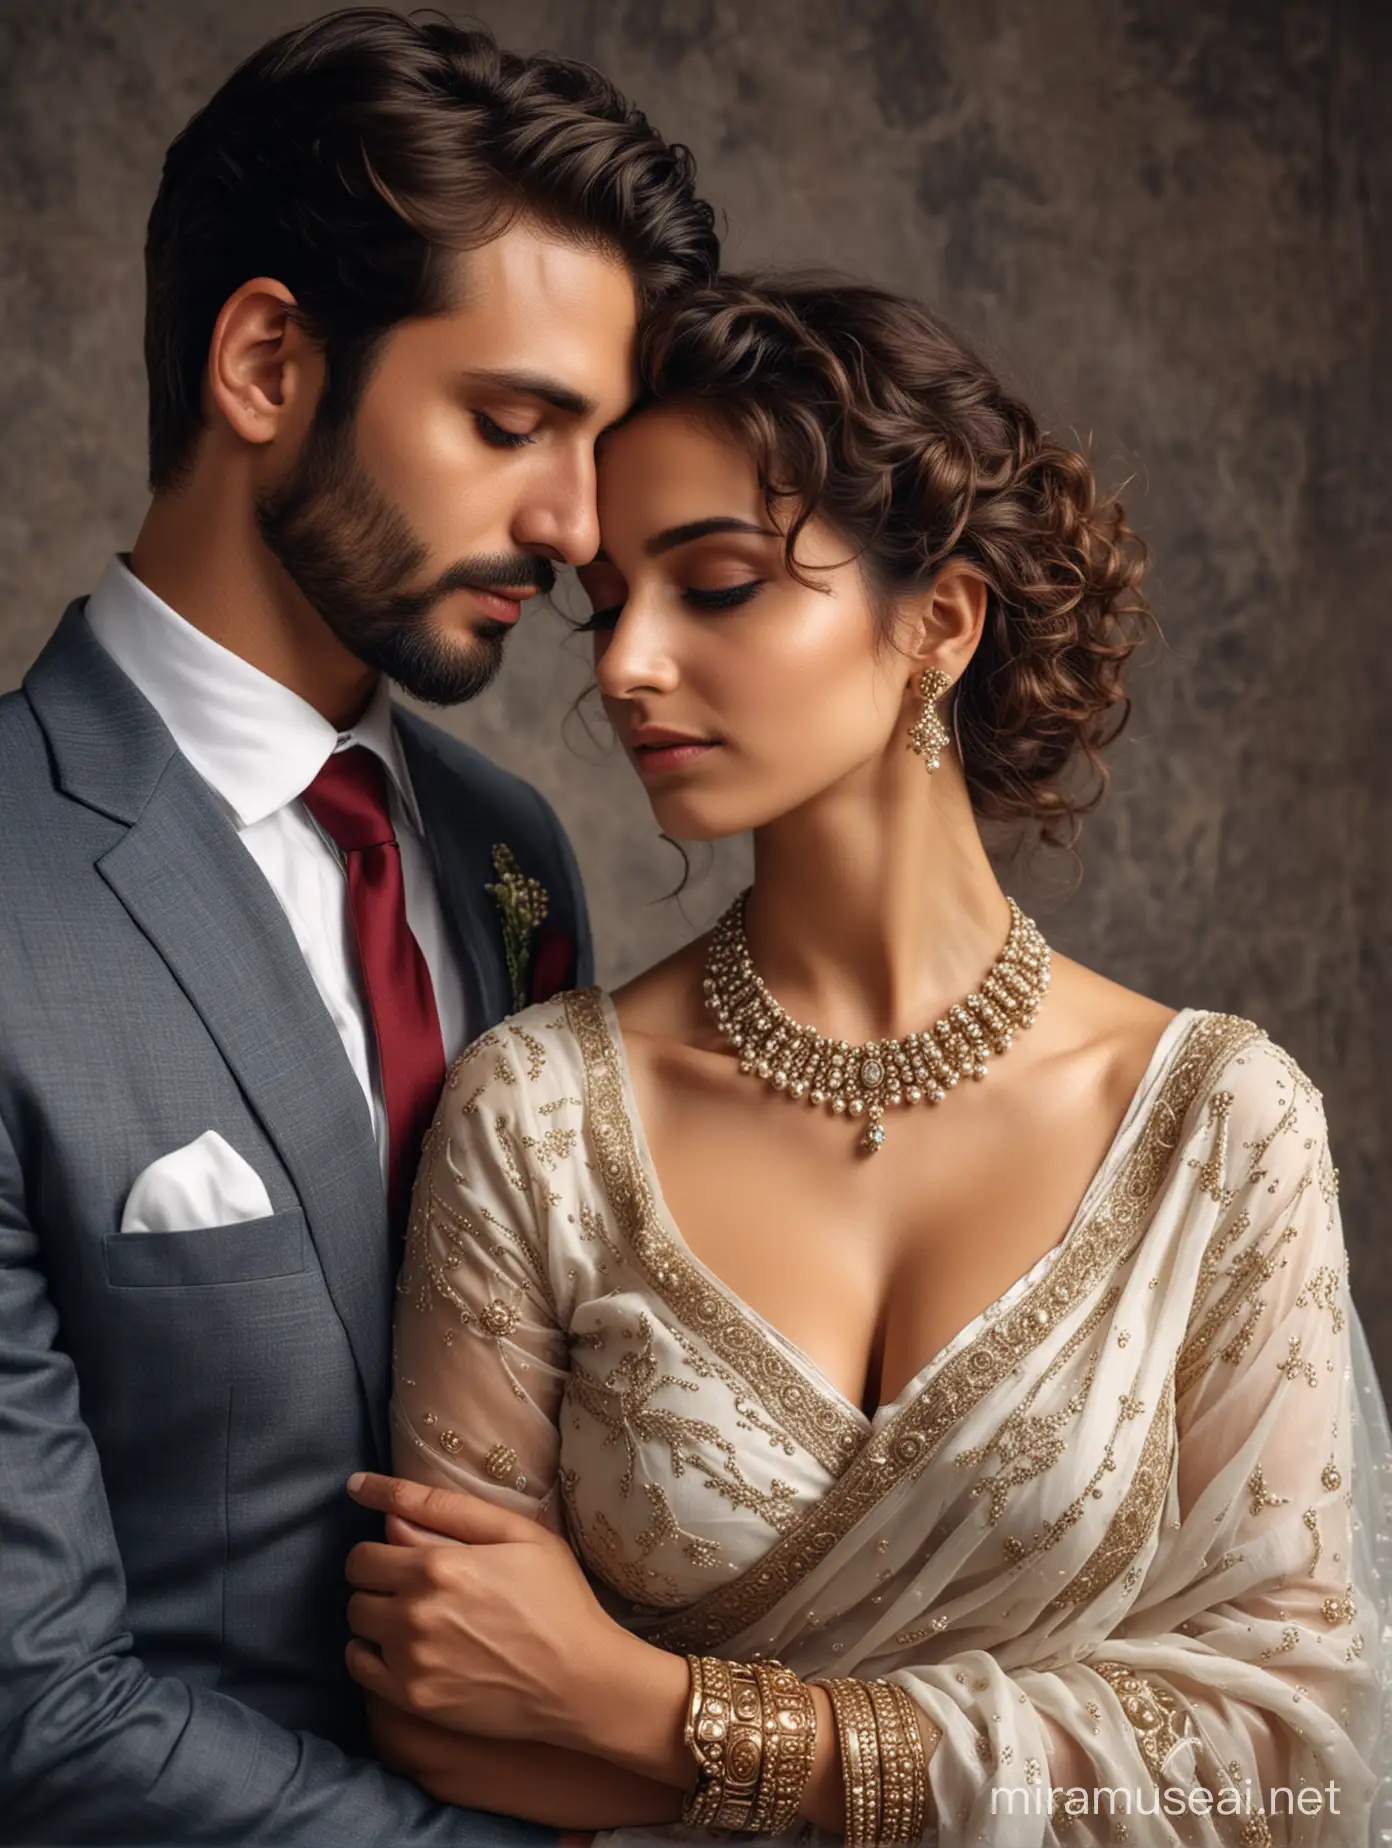 Elegant Indian Couple Embracing with Deep Emotion in Bridal Attire